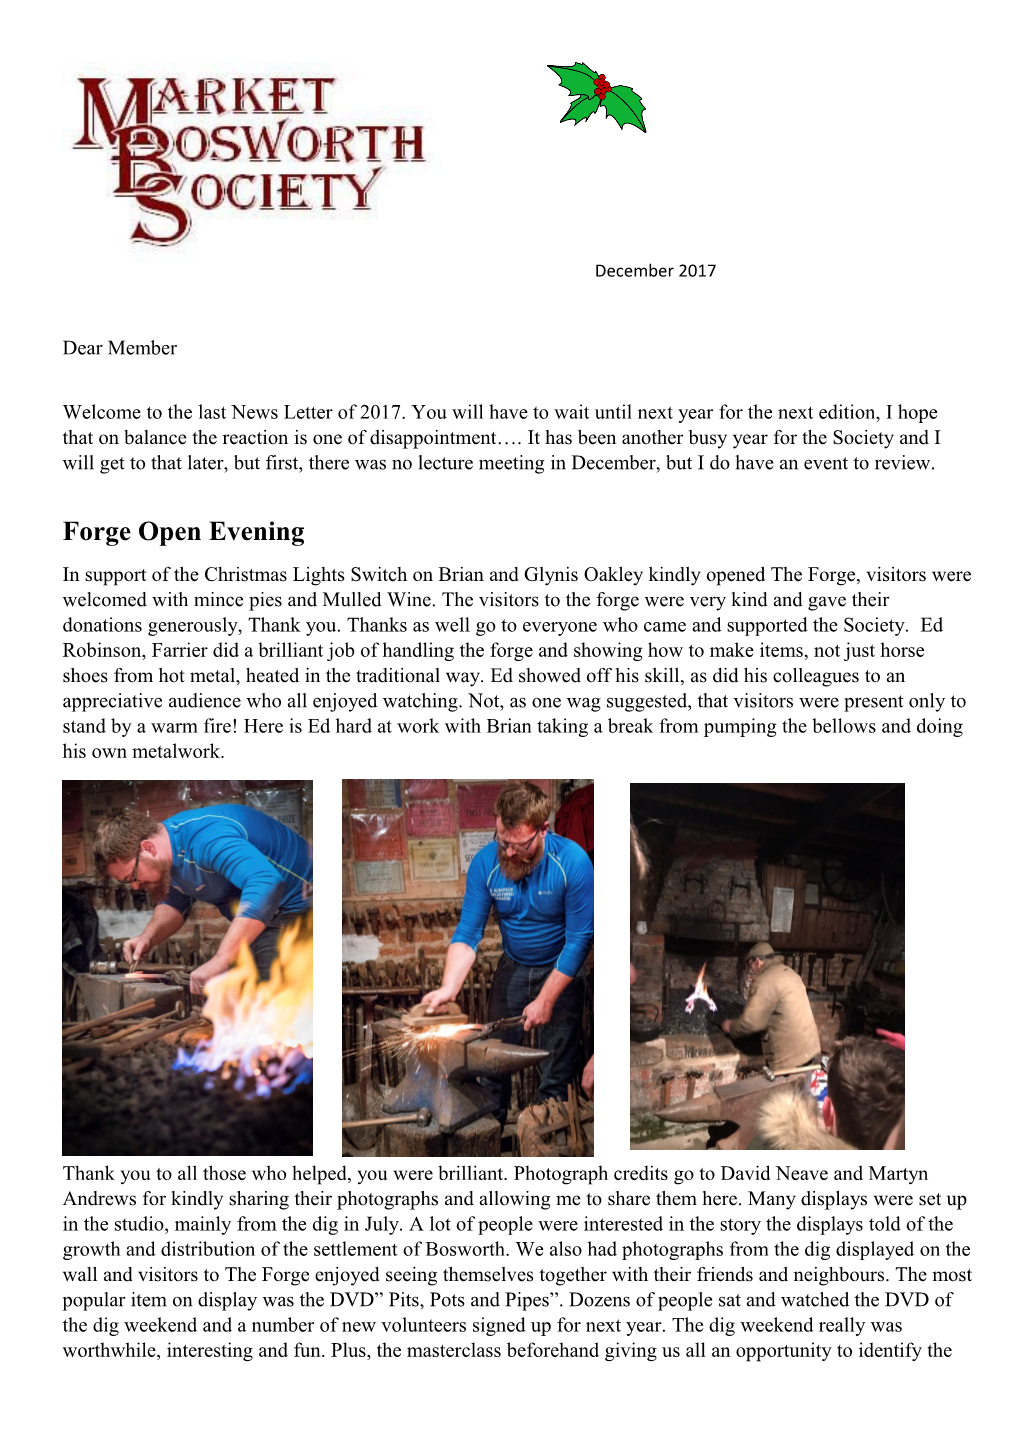 Forge Open Evening